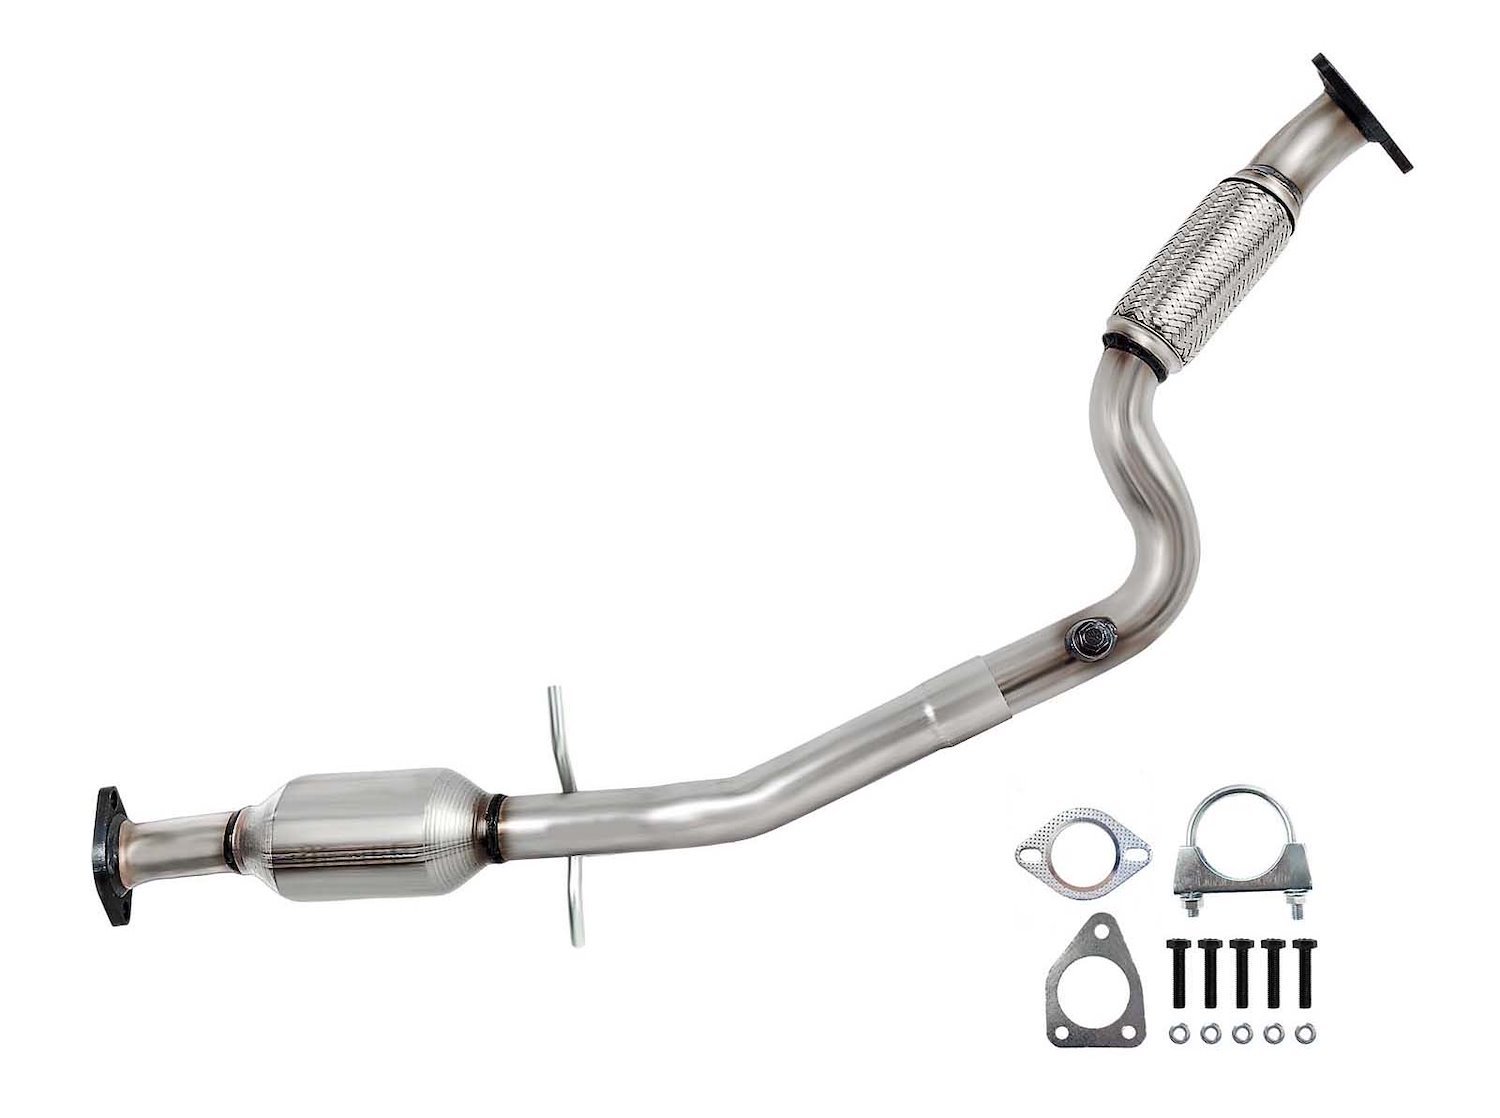 Catalytic Converter Fits 2011-2016 Chevrolet Cruze w/1.6L Turbocharged 4 cyl. Eng. [Rear]